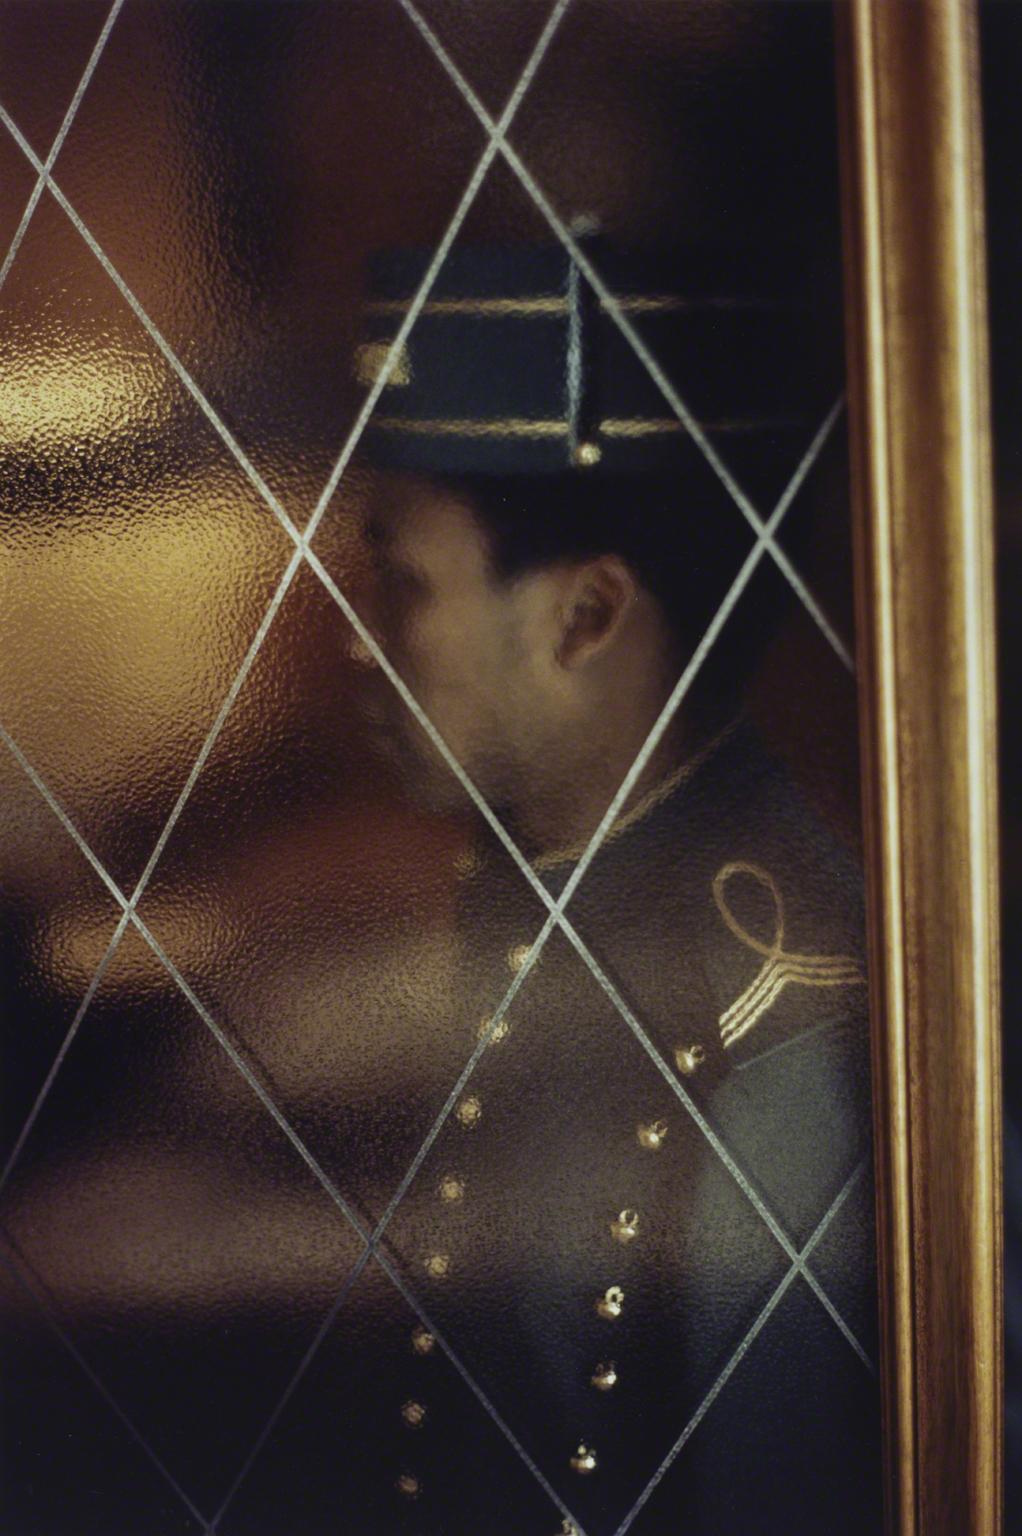 Color portrait of a valet or doorman that is partially obscured by dimpled glass 